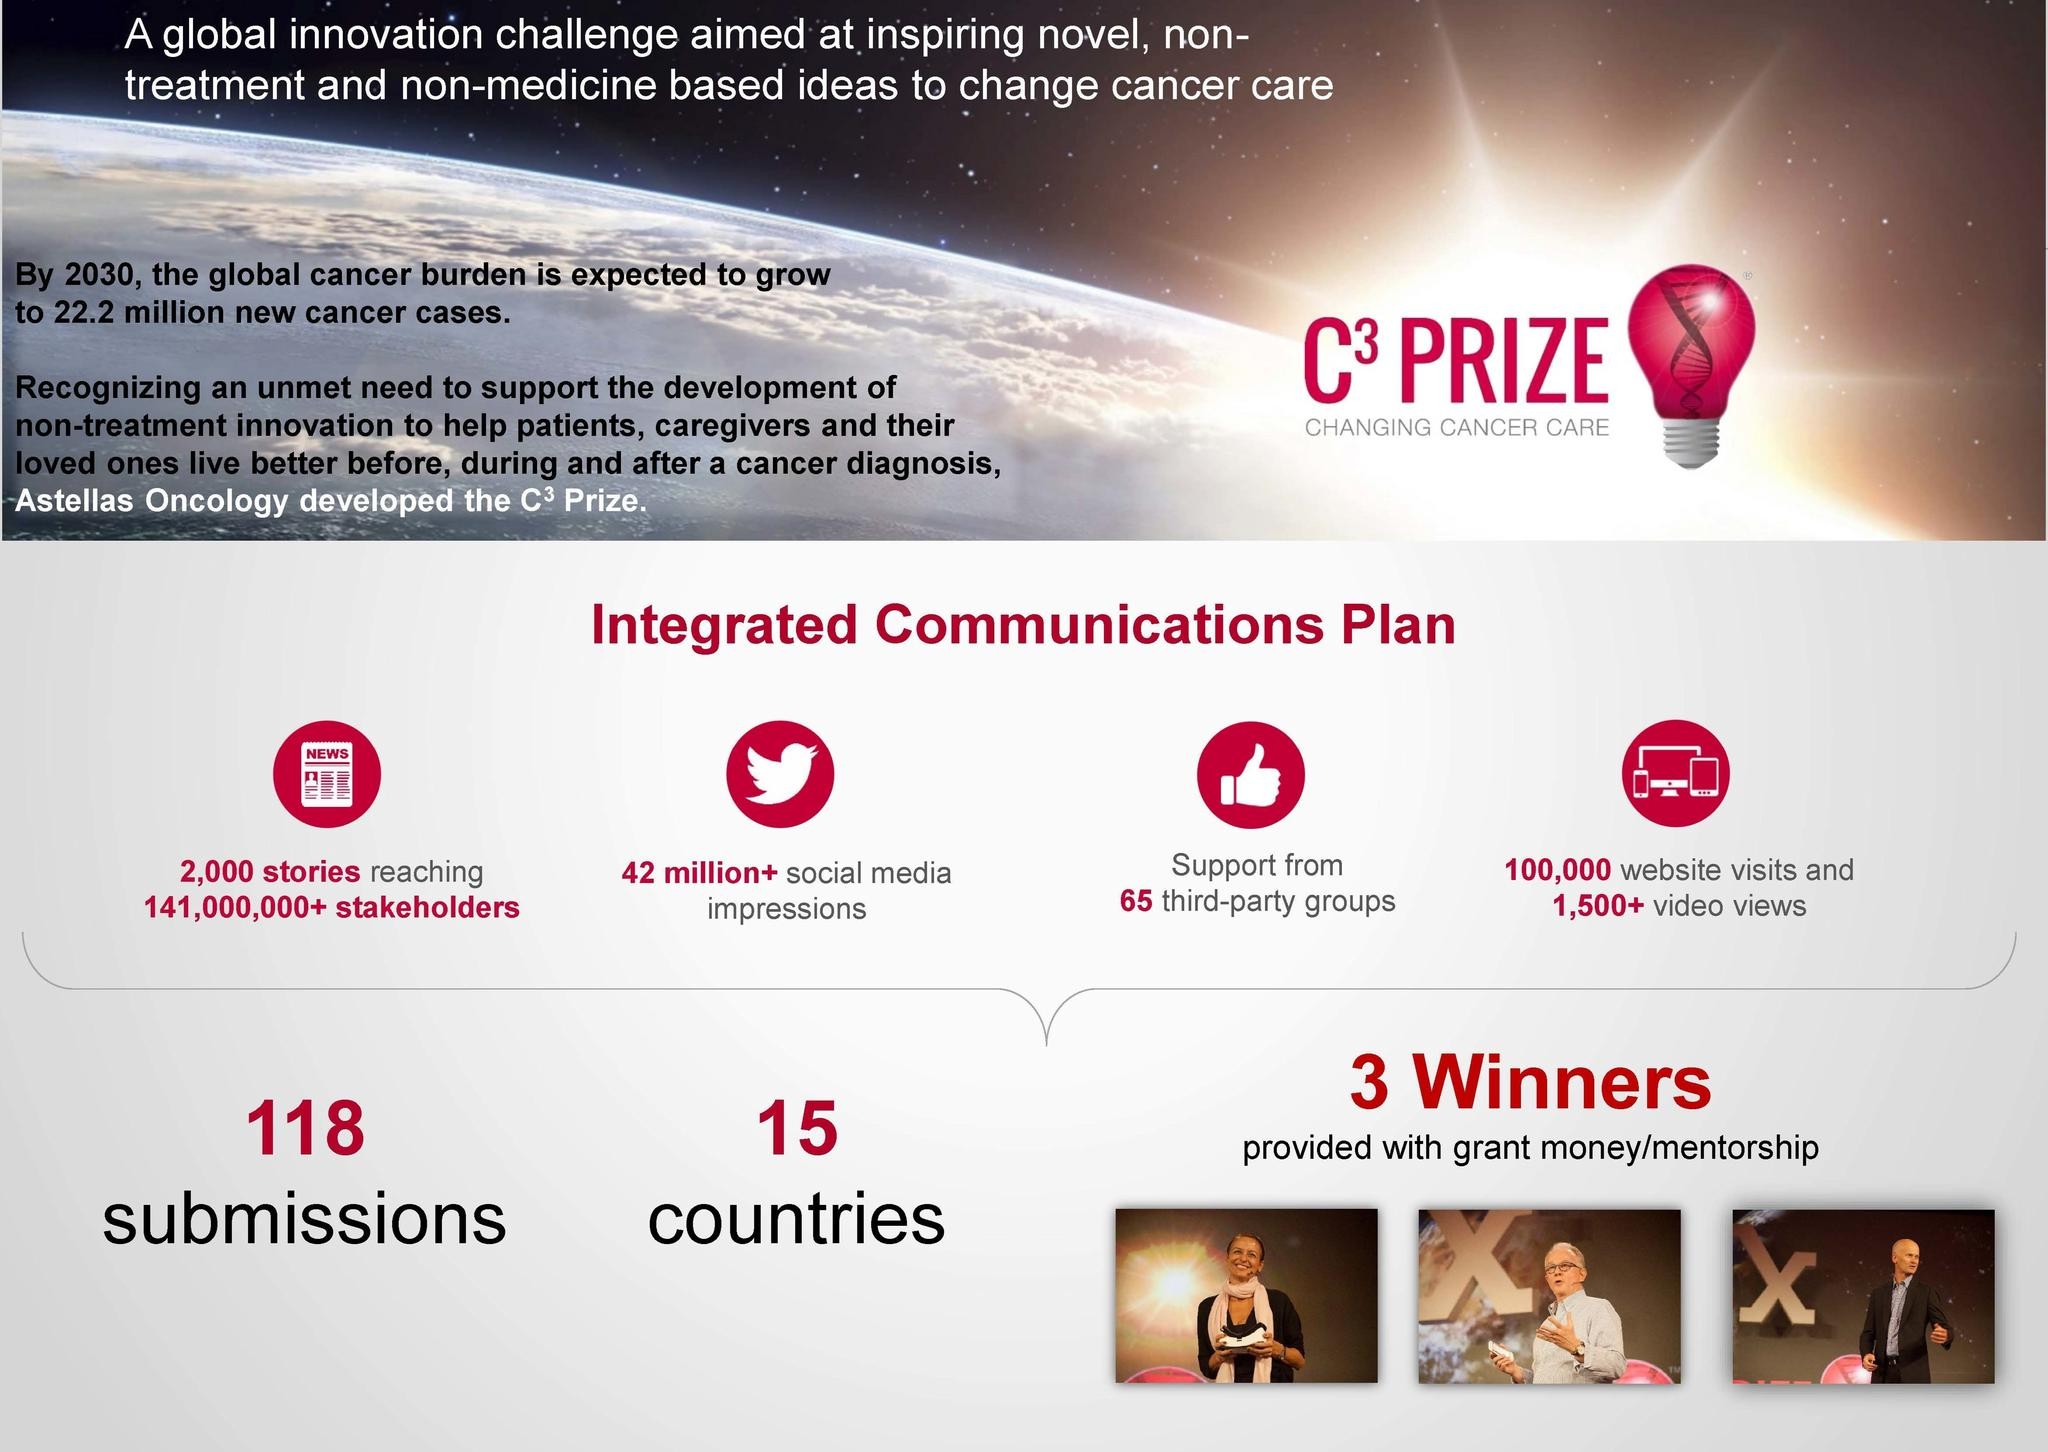 The Astellas Oncology C3 Prize